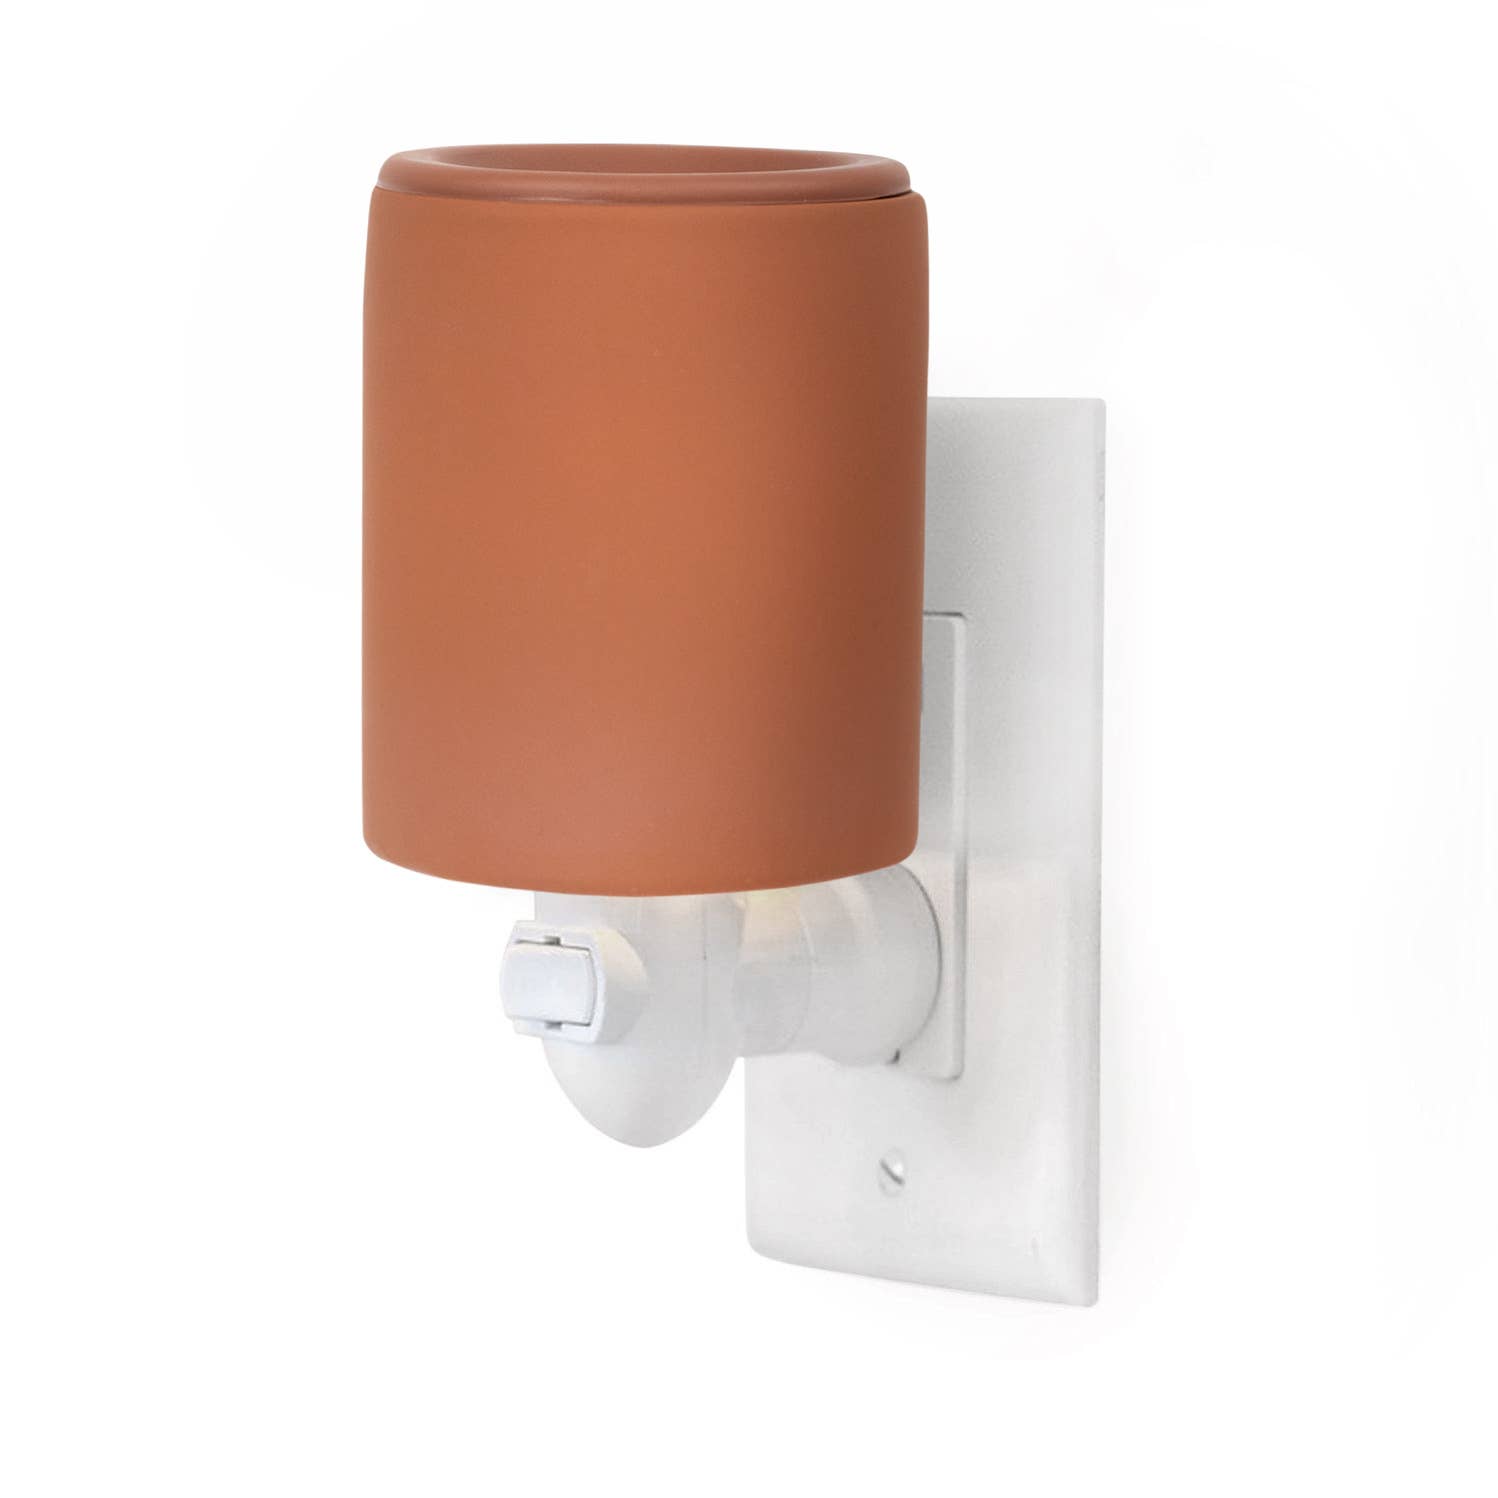 Happy Wax - Outlet Wax Melt Warmer for Scented Wax Melts: Copper Dip